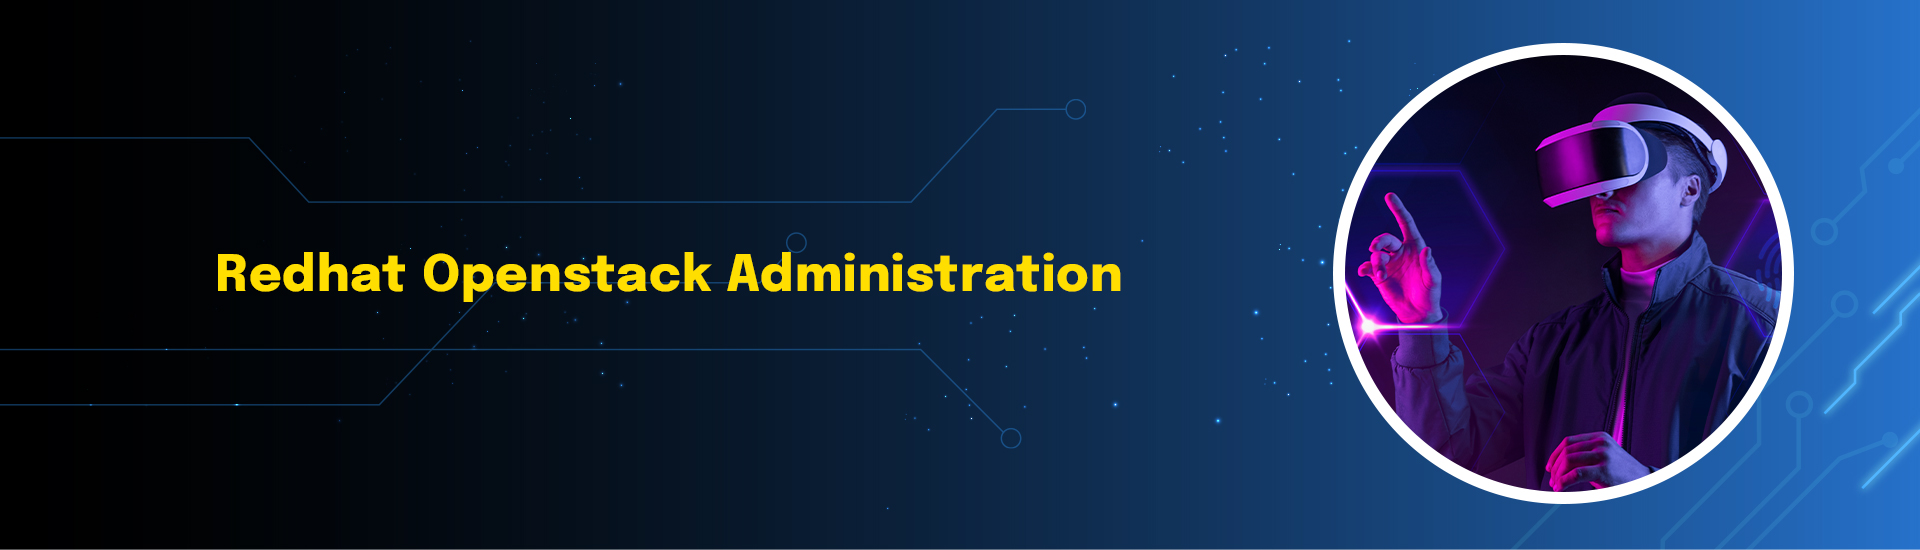 Redhat Openstack Administration